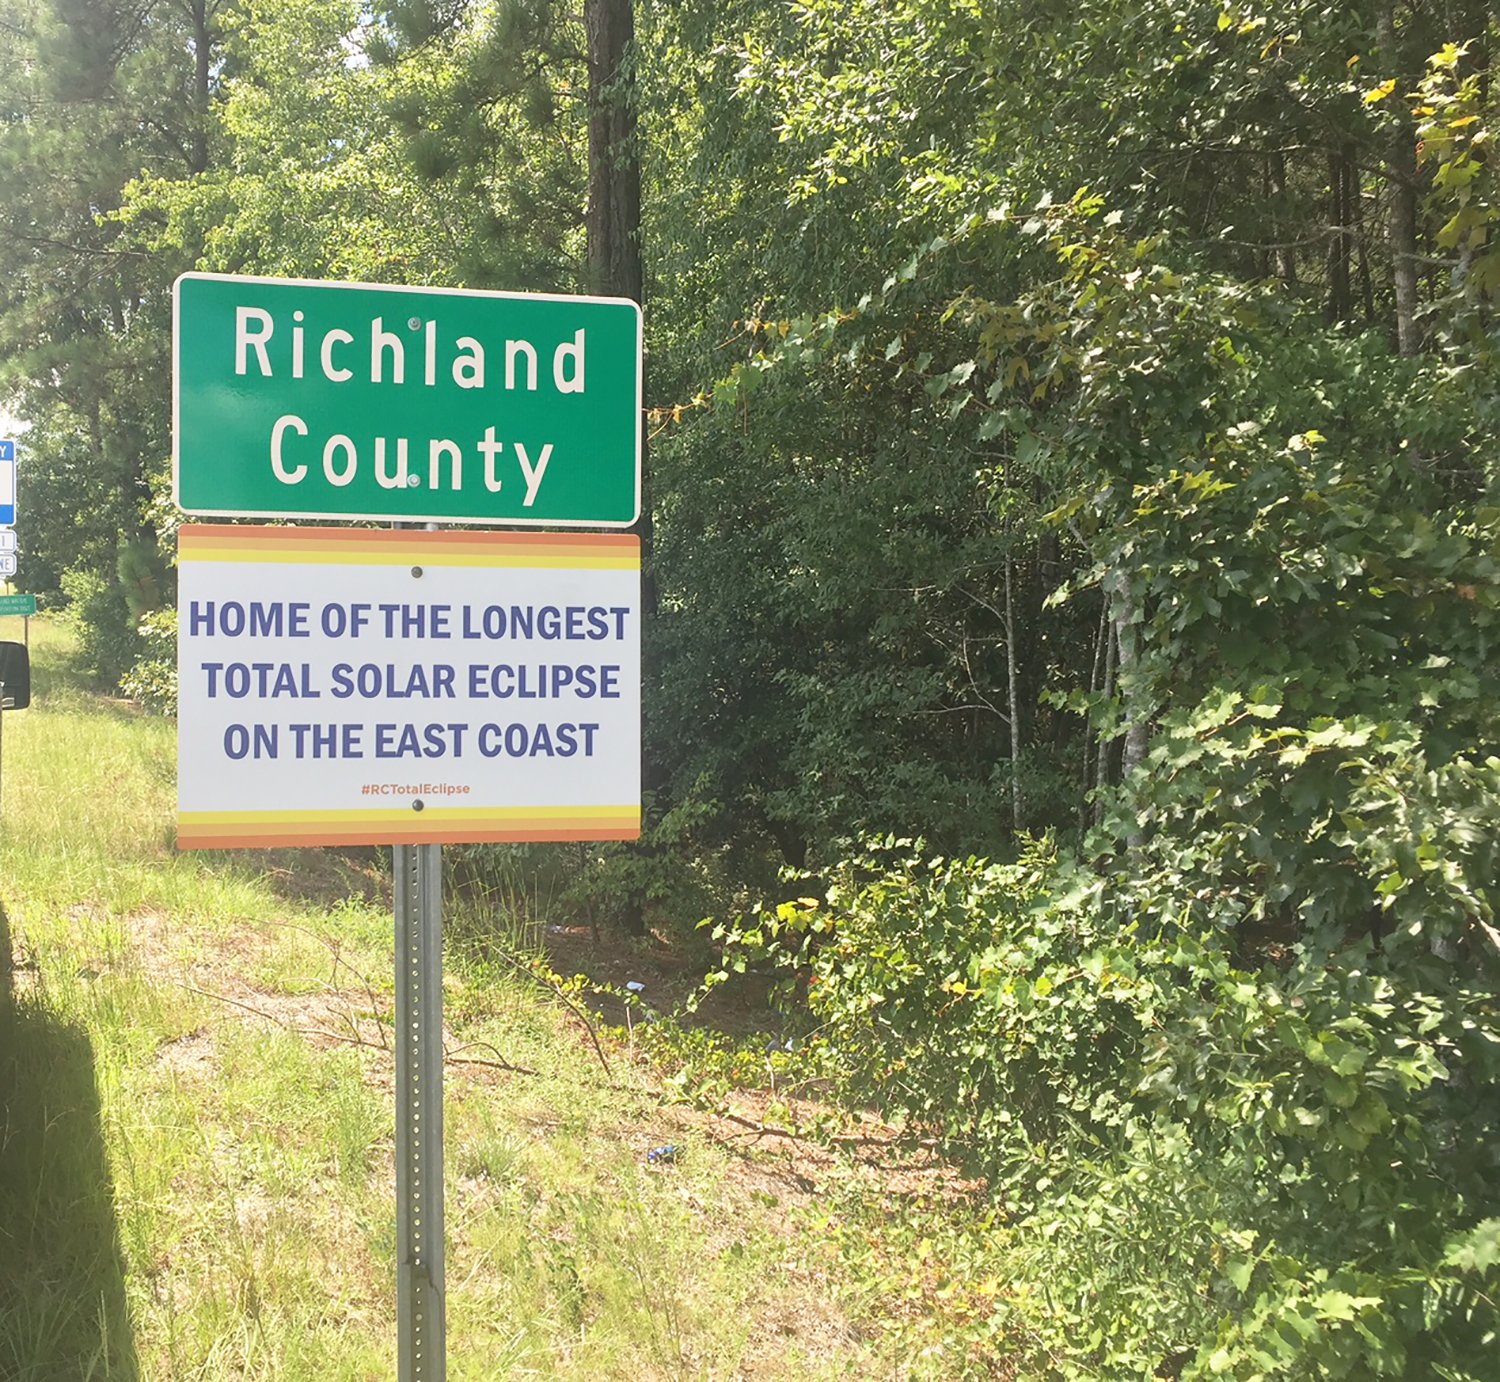 custom-signs-placed-at-entry-points-into-richland-county-abc-columbia